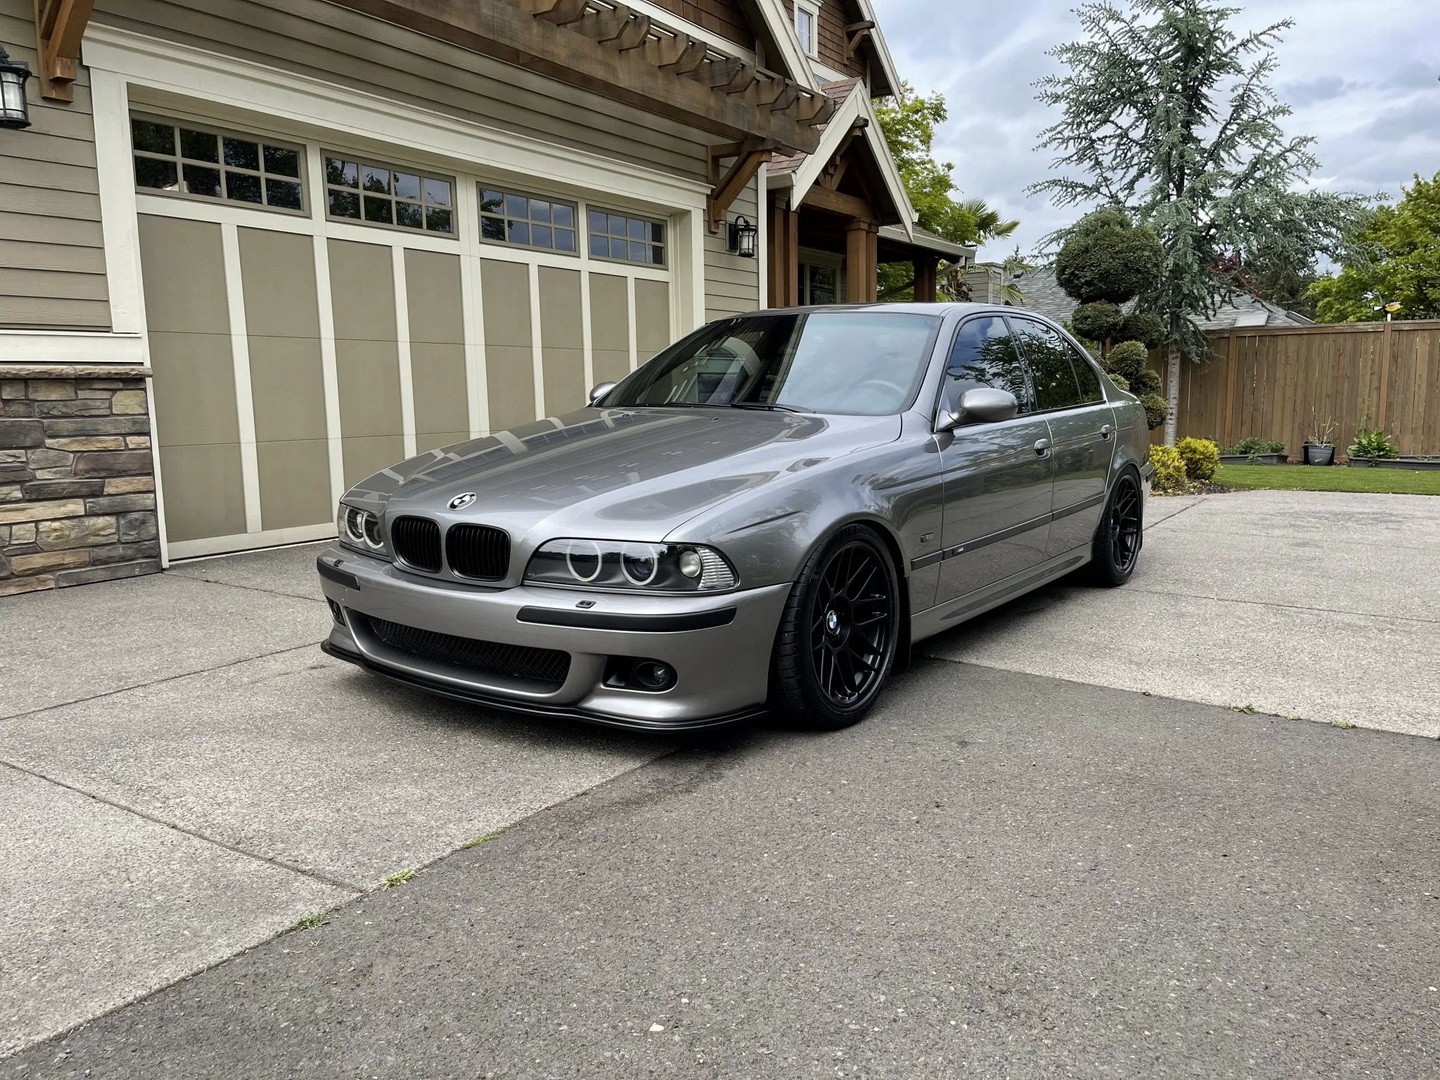 Tuned E39 BMW M5 Up for Grabs With Several Awesome Interior and